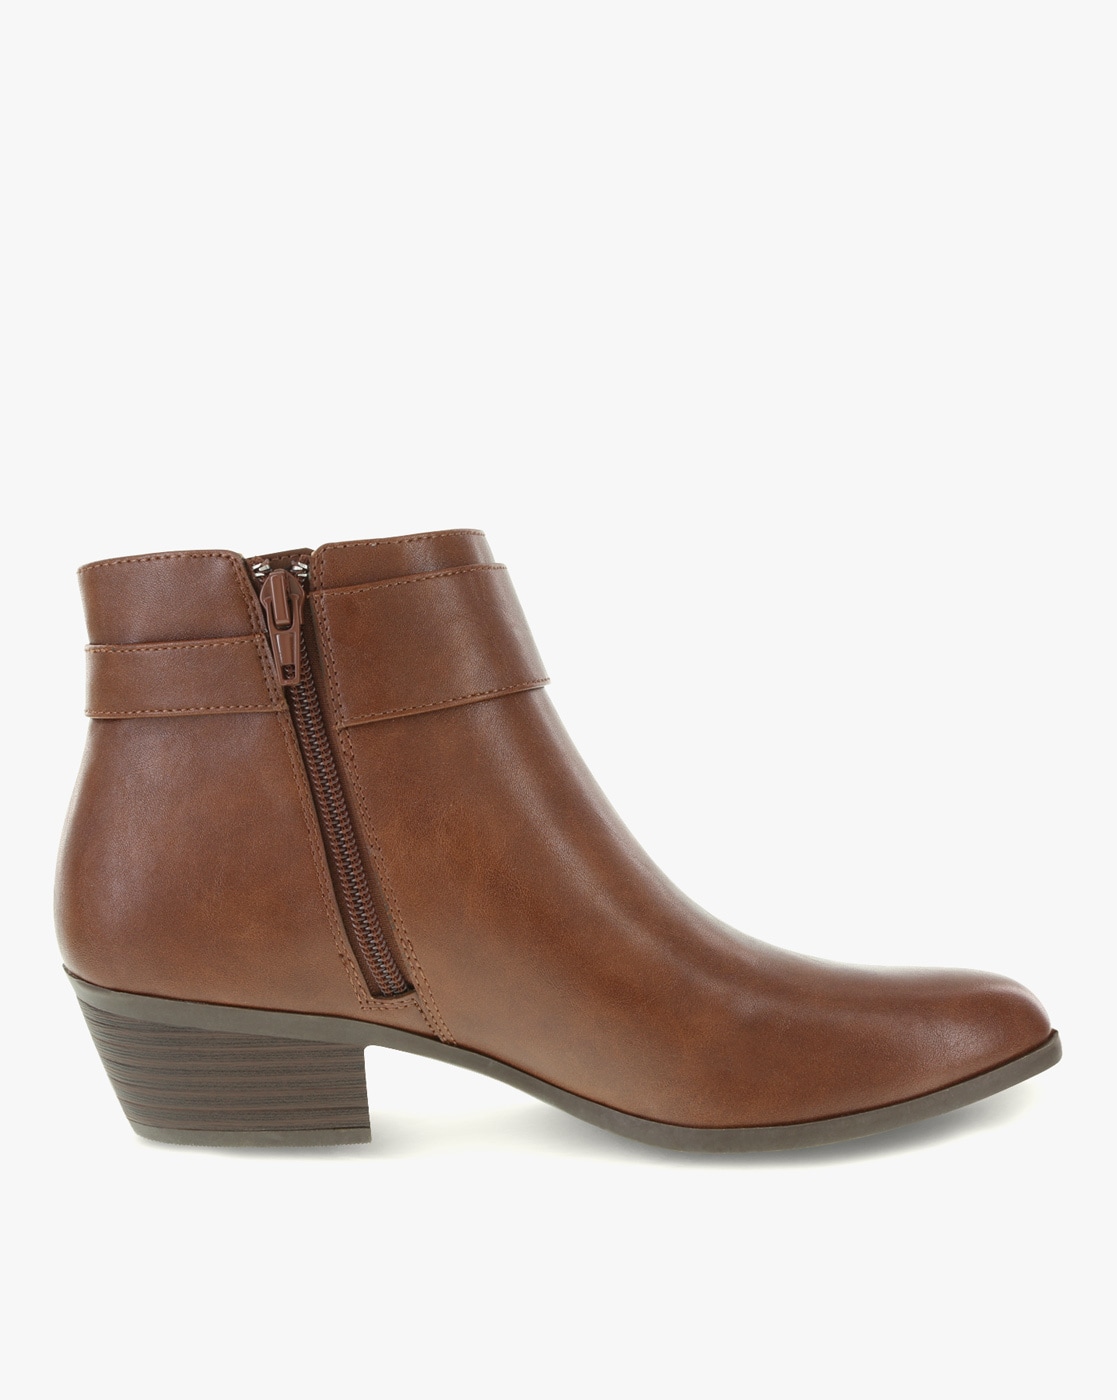 comfort plus ankle boots